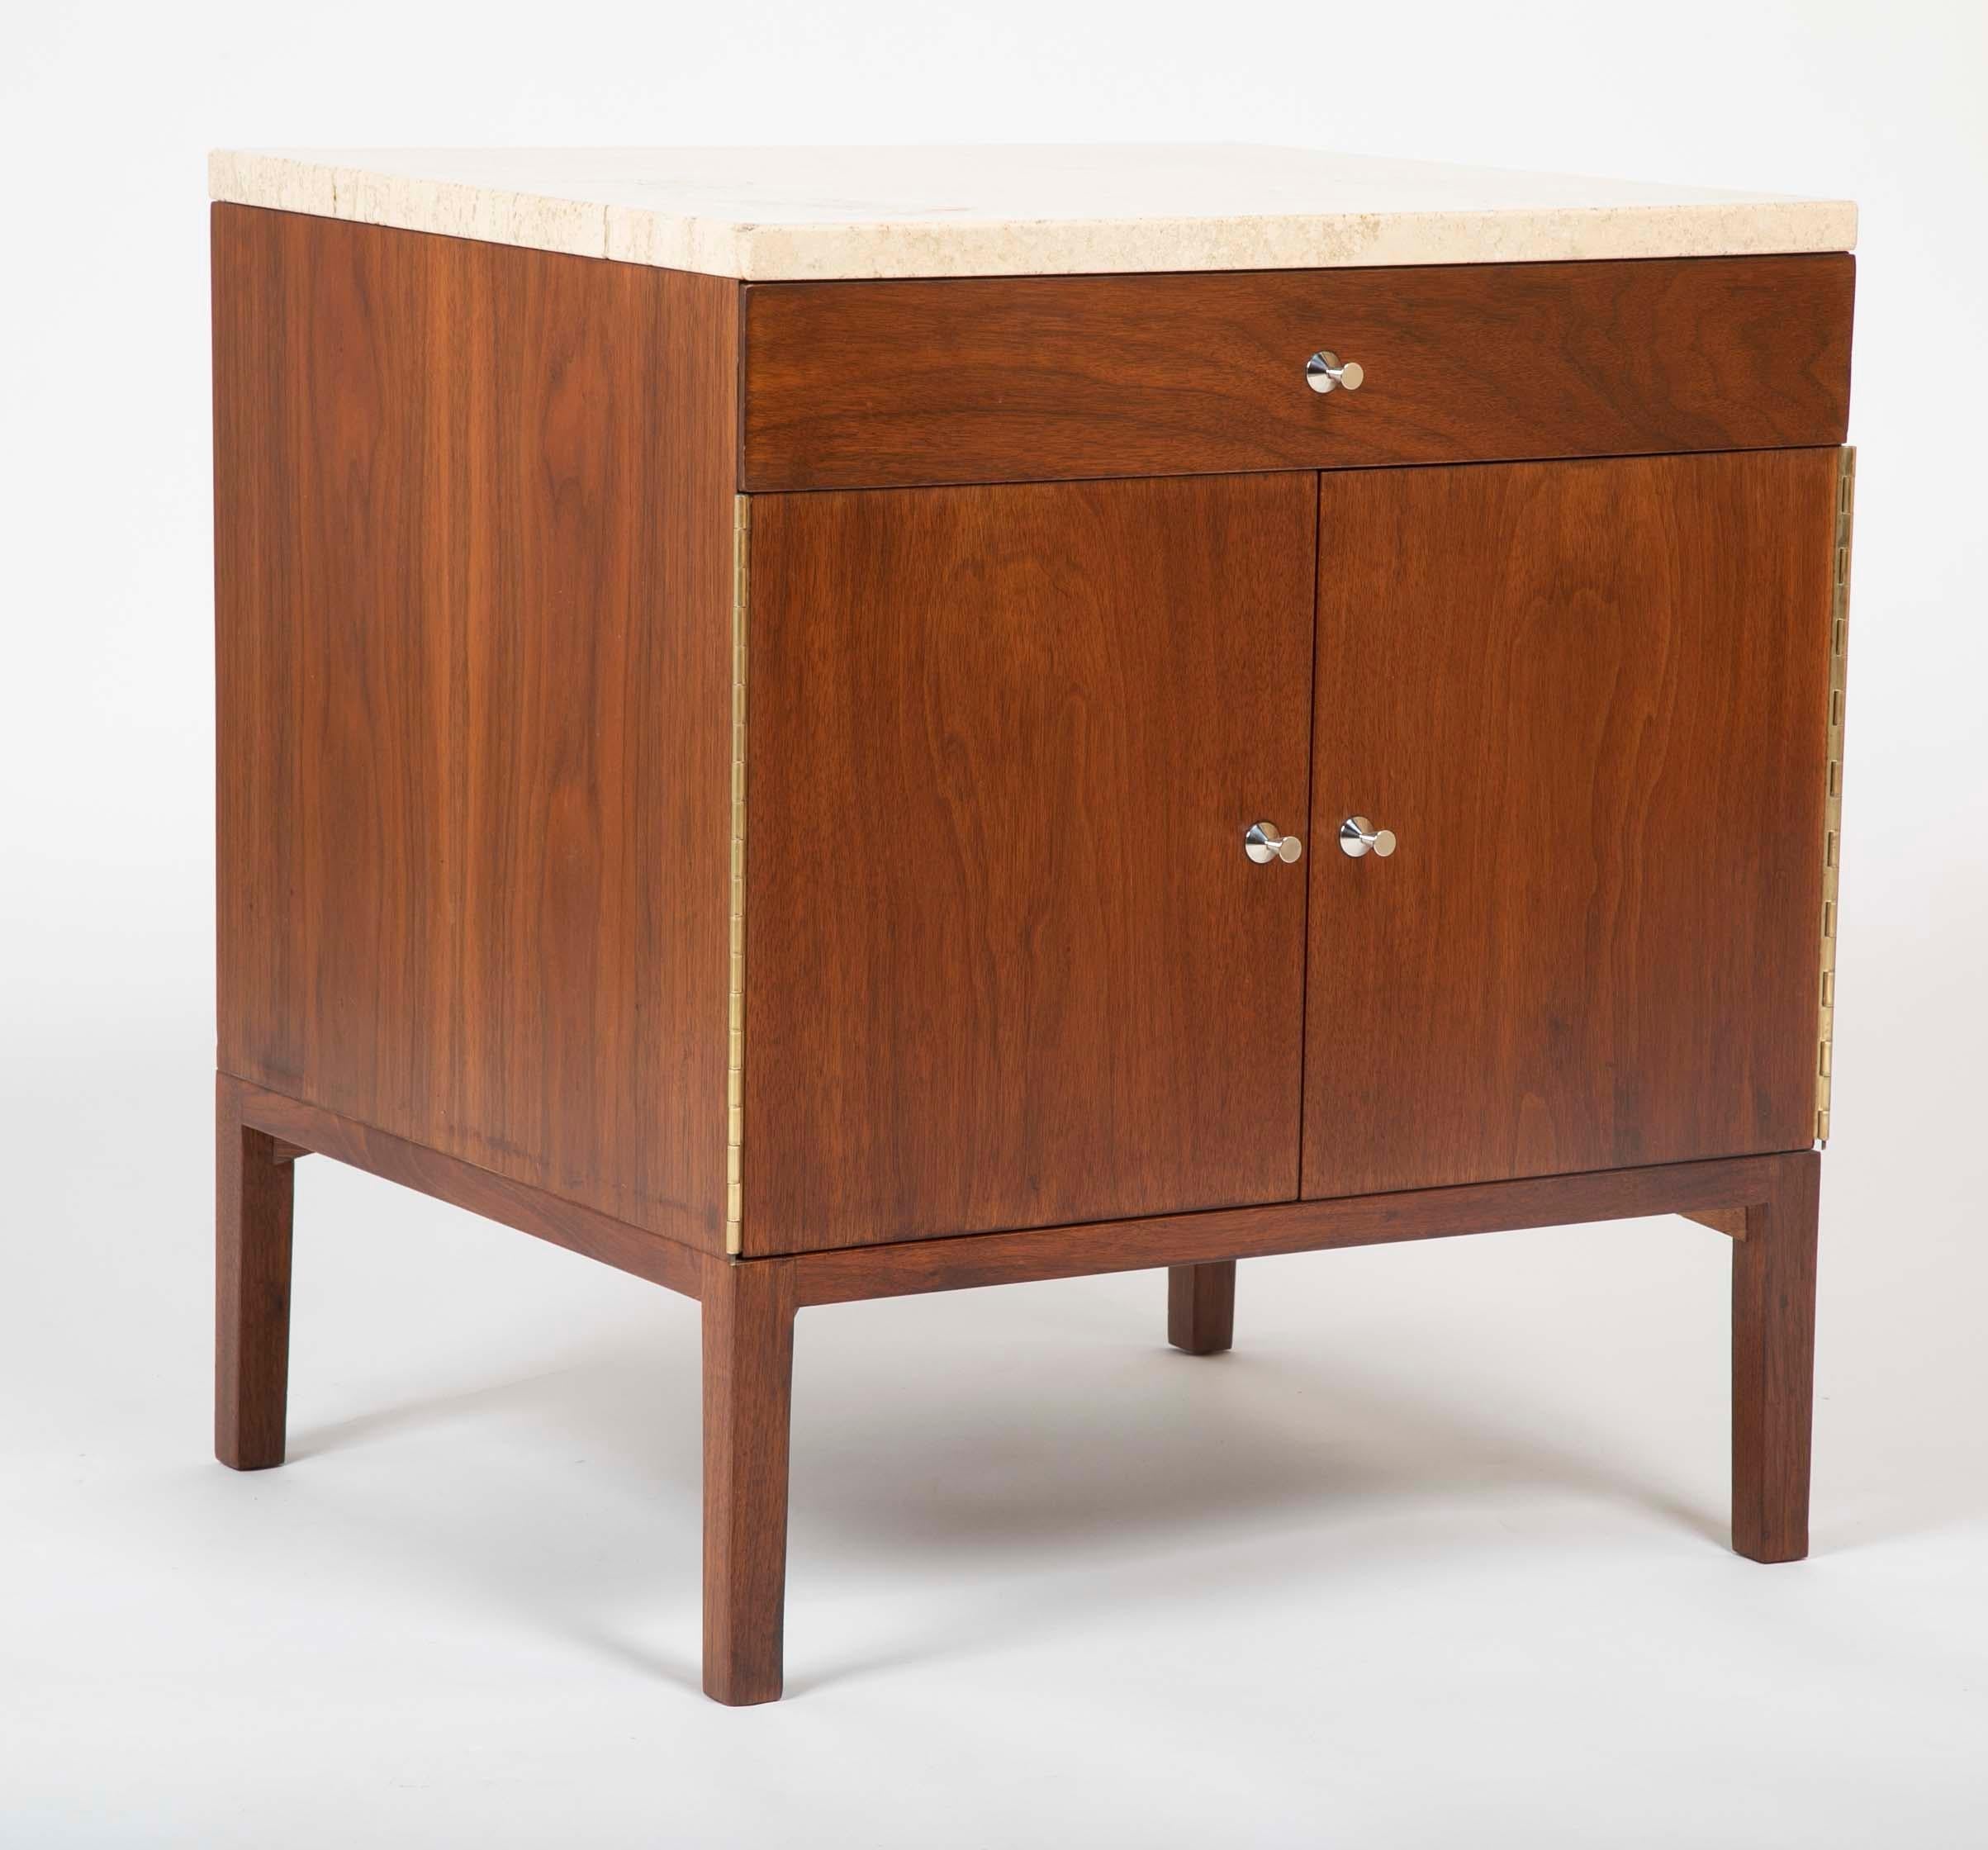 A gorgeous pair of Mid-Century Modern walnut and travertine nightstands or side tables from the 